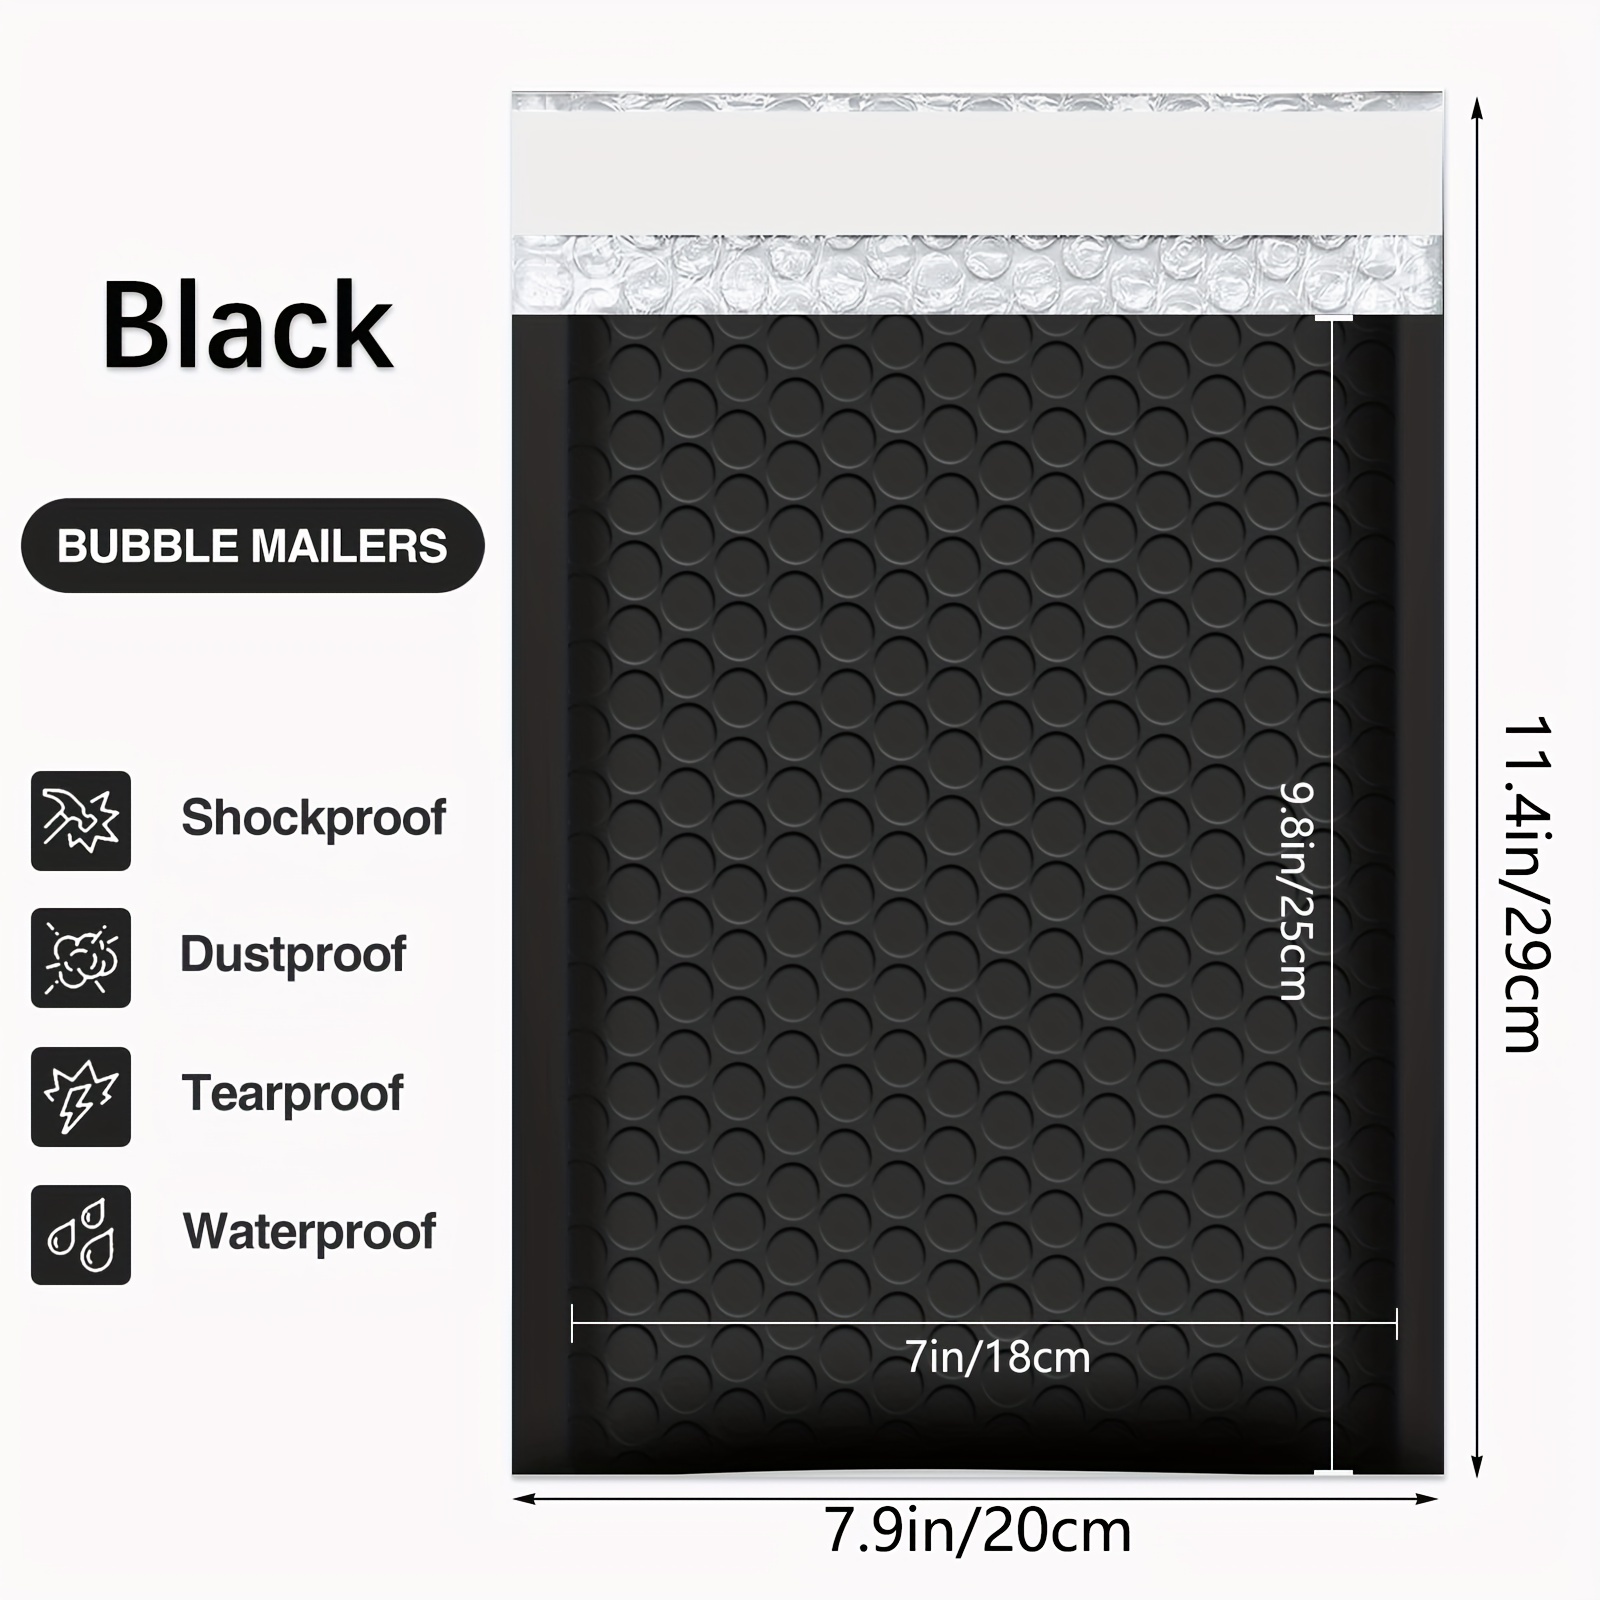 Black Bubble Mailers, Padded Poly Bubble Mailers, Packaging For